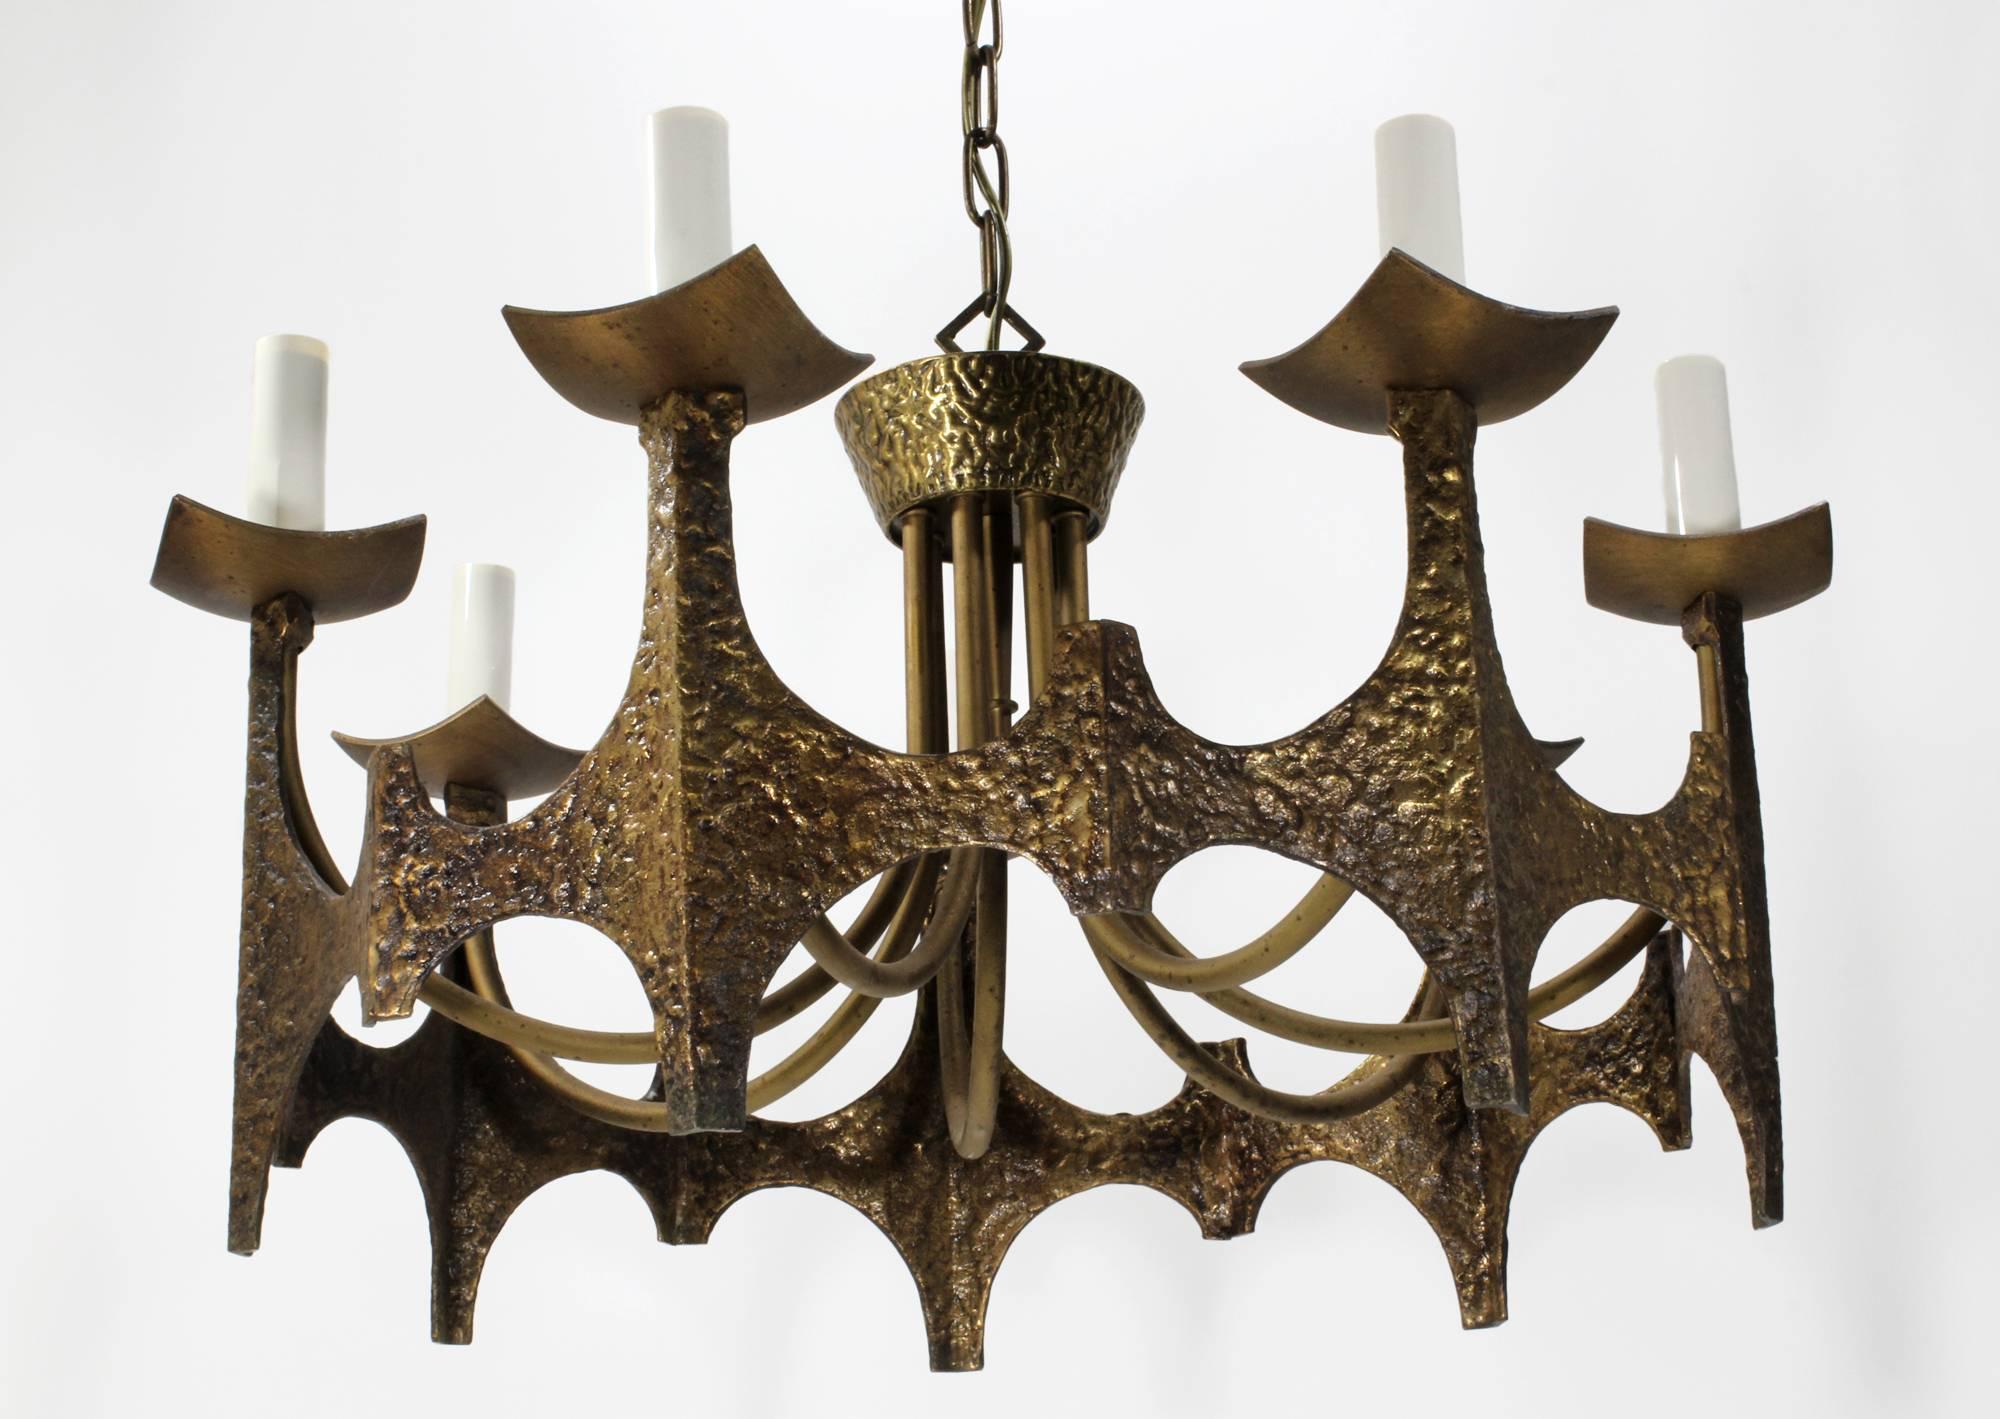 A seven-sided Brutalist chandelier in a crown motif made by Moe Light (American) in 1969. Cast and hammered solid brass construction with seven candelabra light sockets (E12, 40 watt max). Includes 19